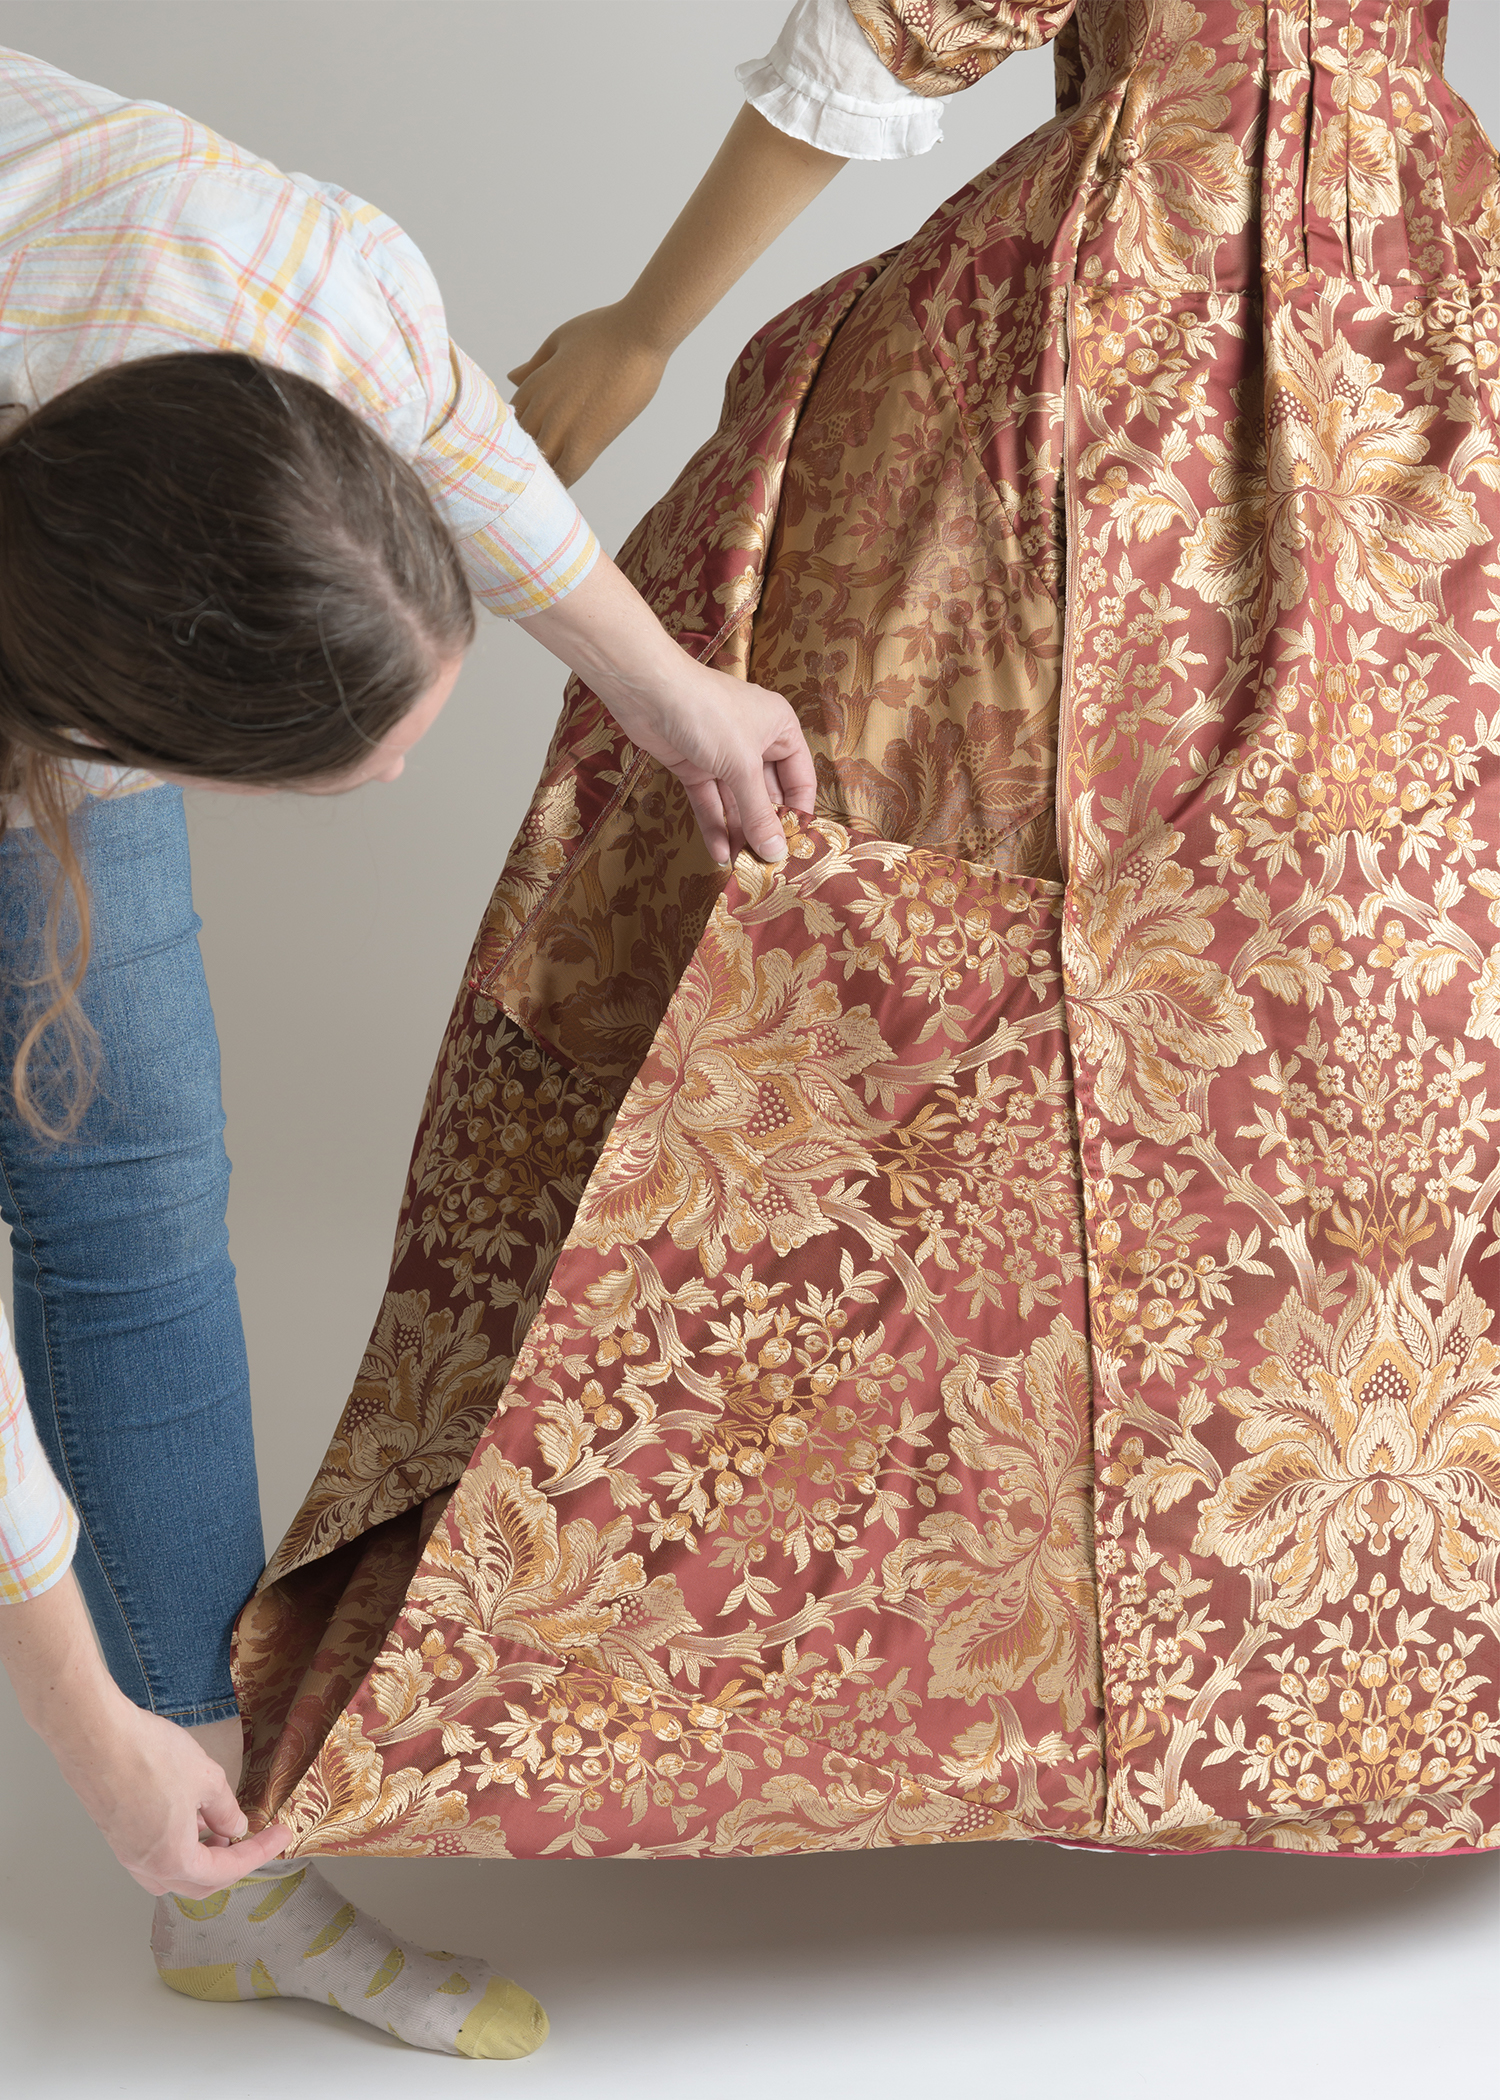 learn the art of mantuamaking here at The Georgian Costume Study Centre